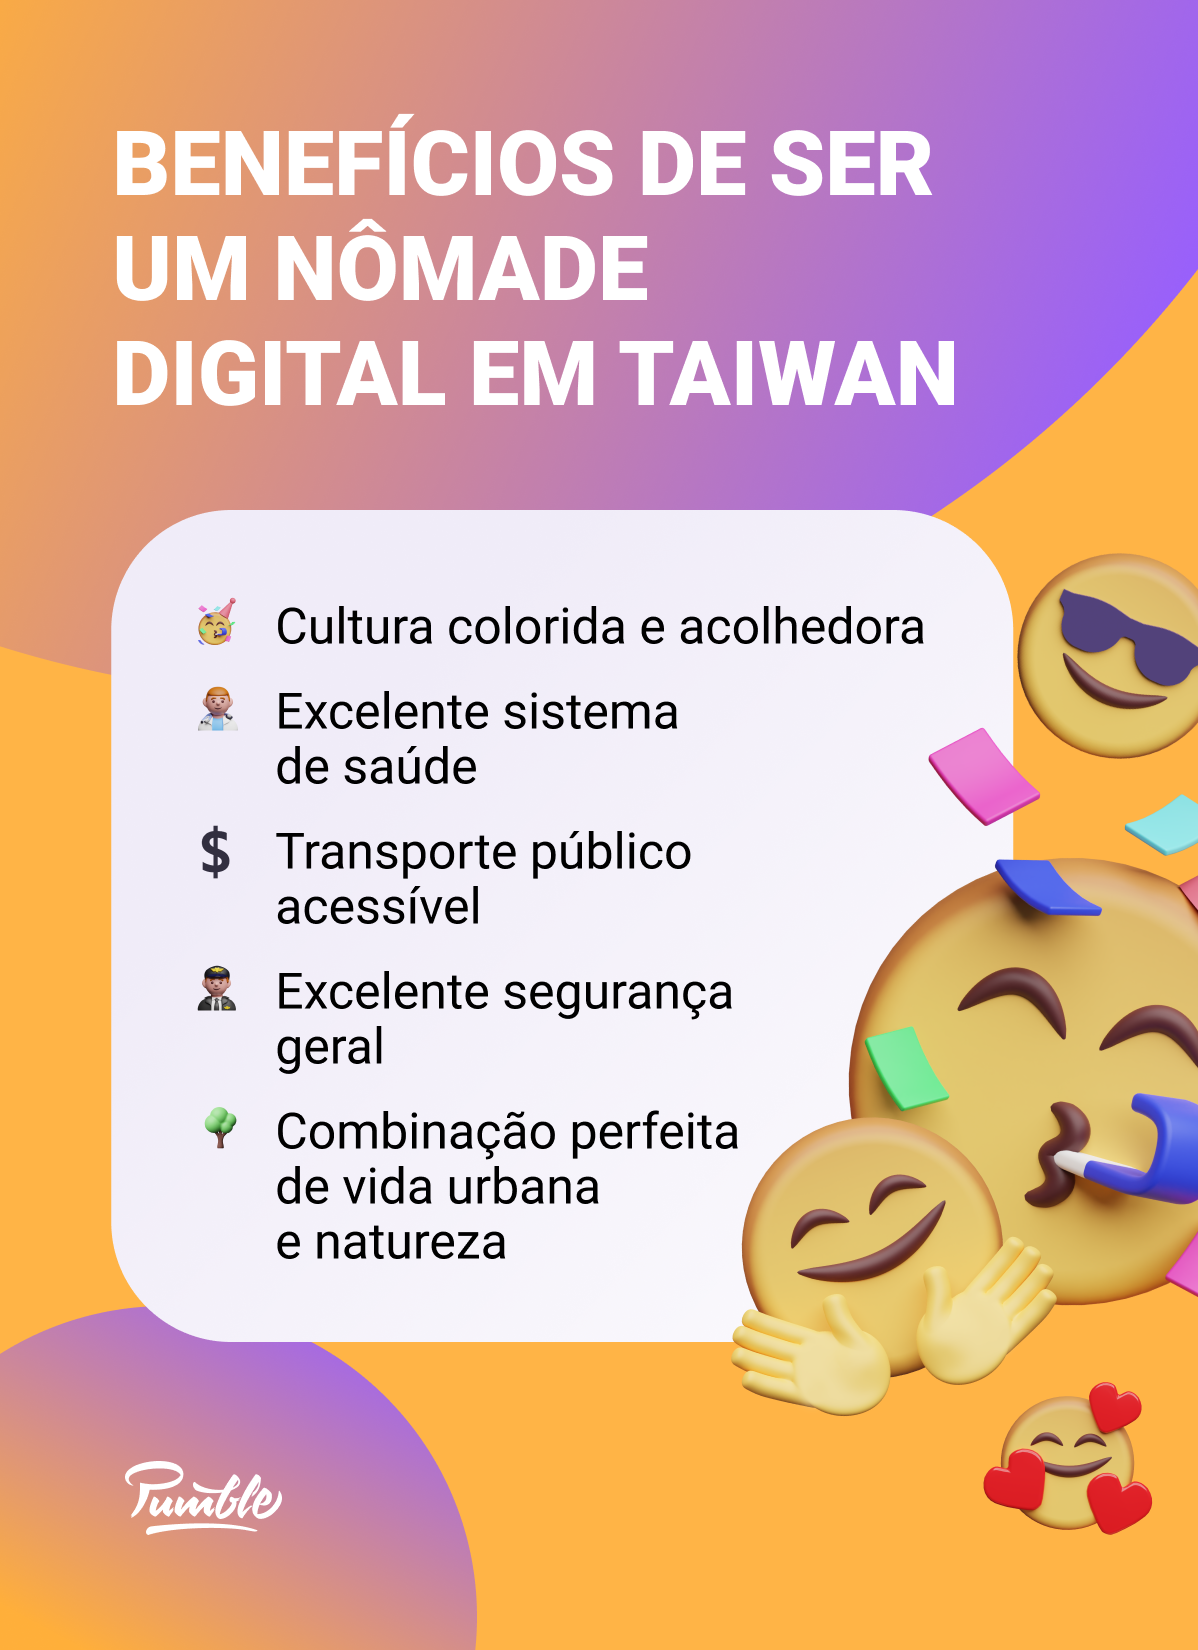 Benefits of being a digital nomad in Taiwan